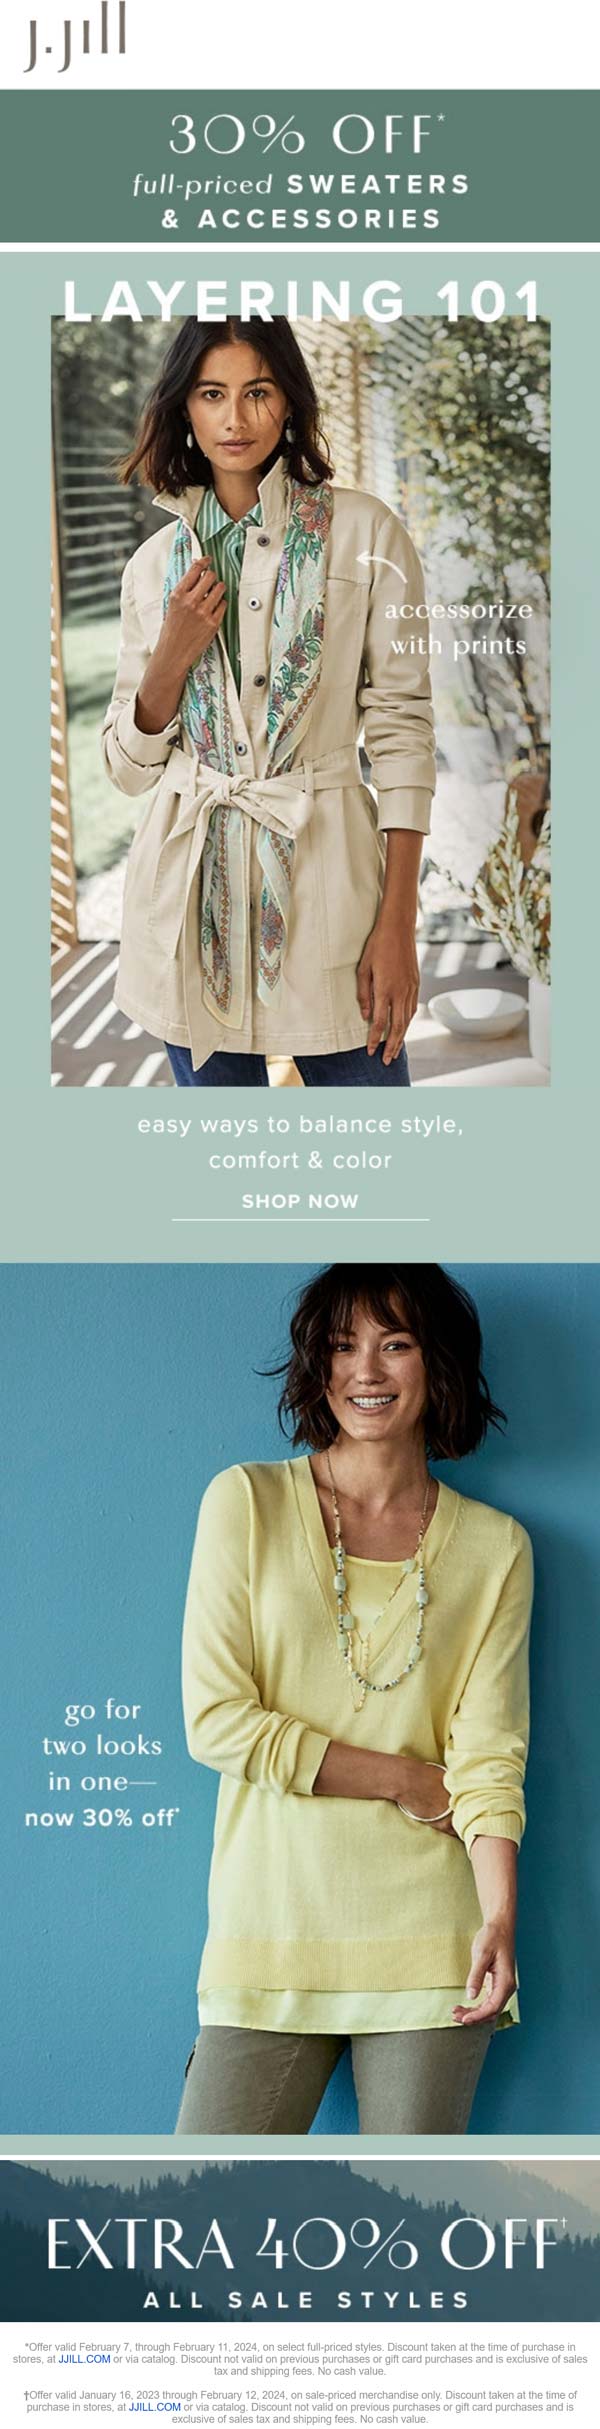 J.Jill stores Coupon  Extra 40% off sale styles & more at J.Jill, ditto online #jjill 